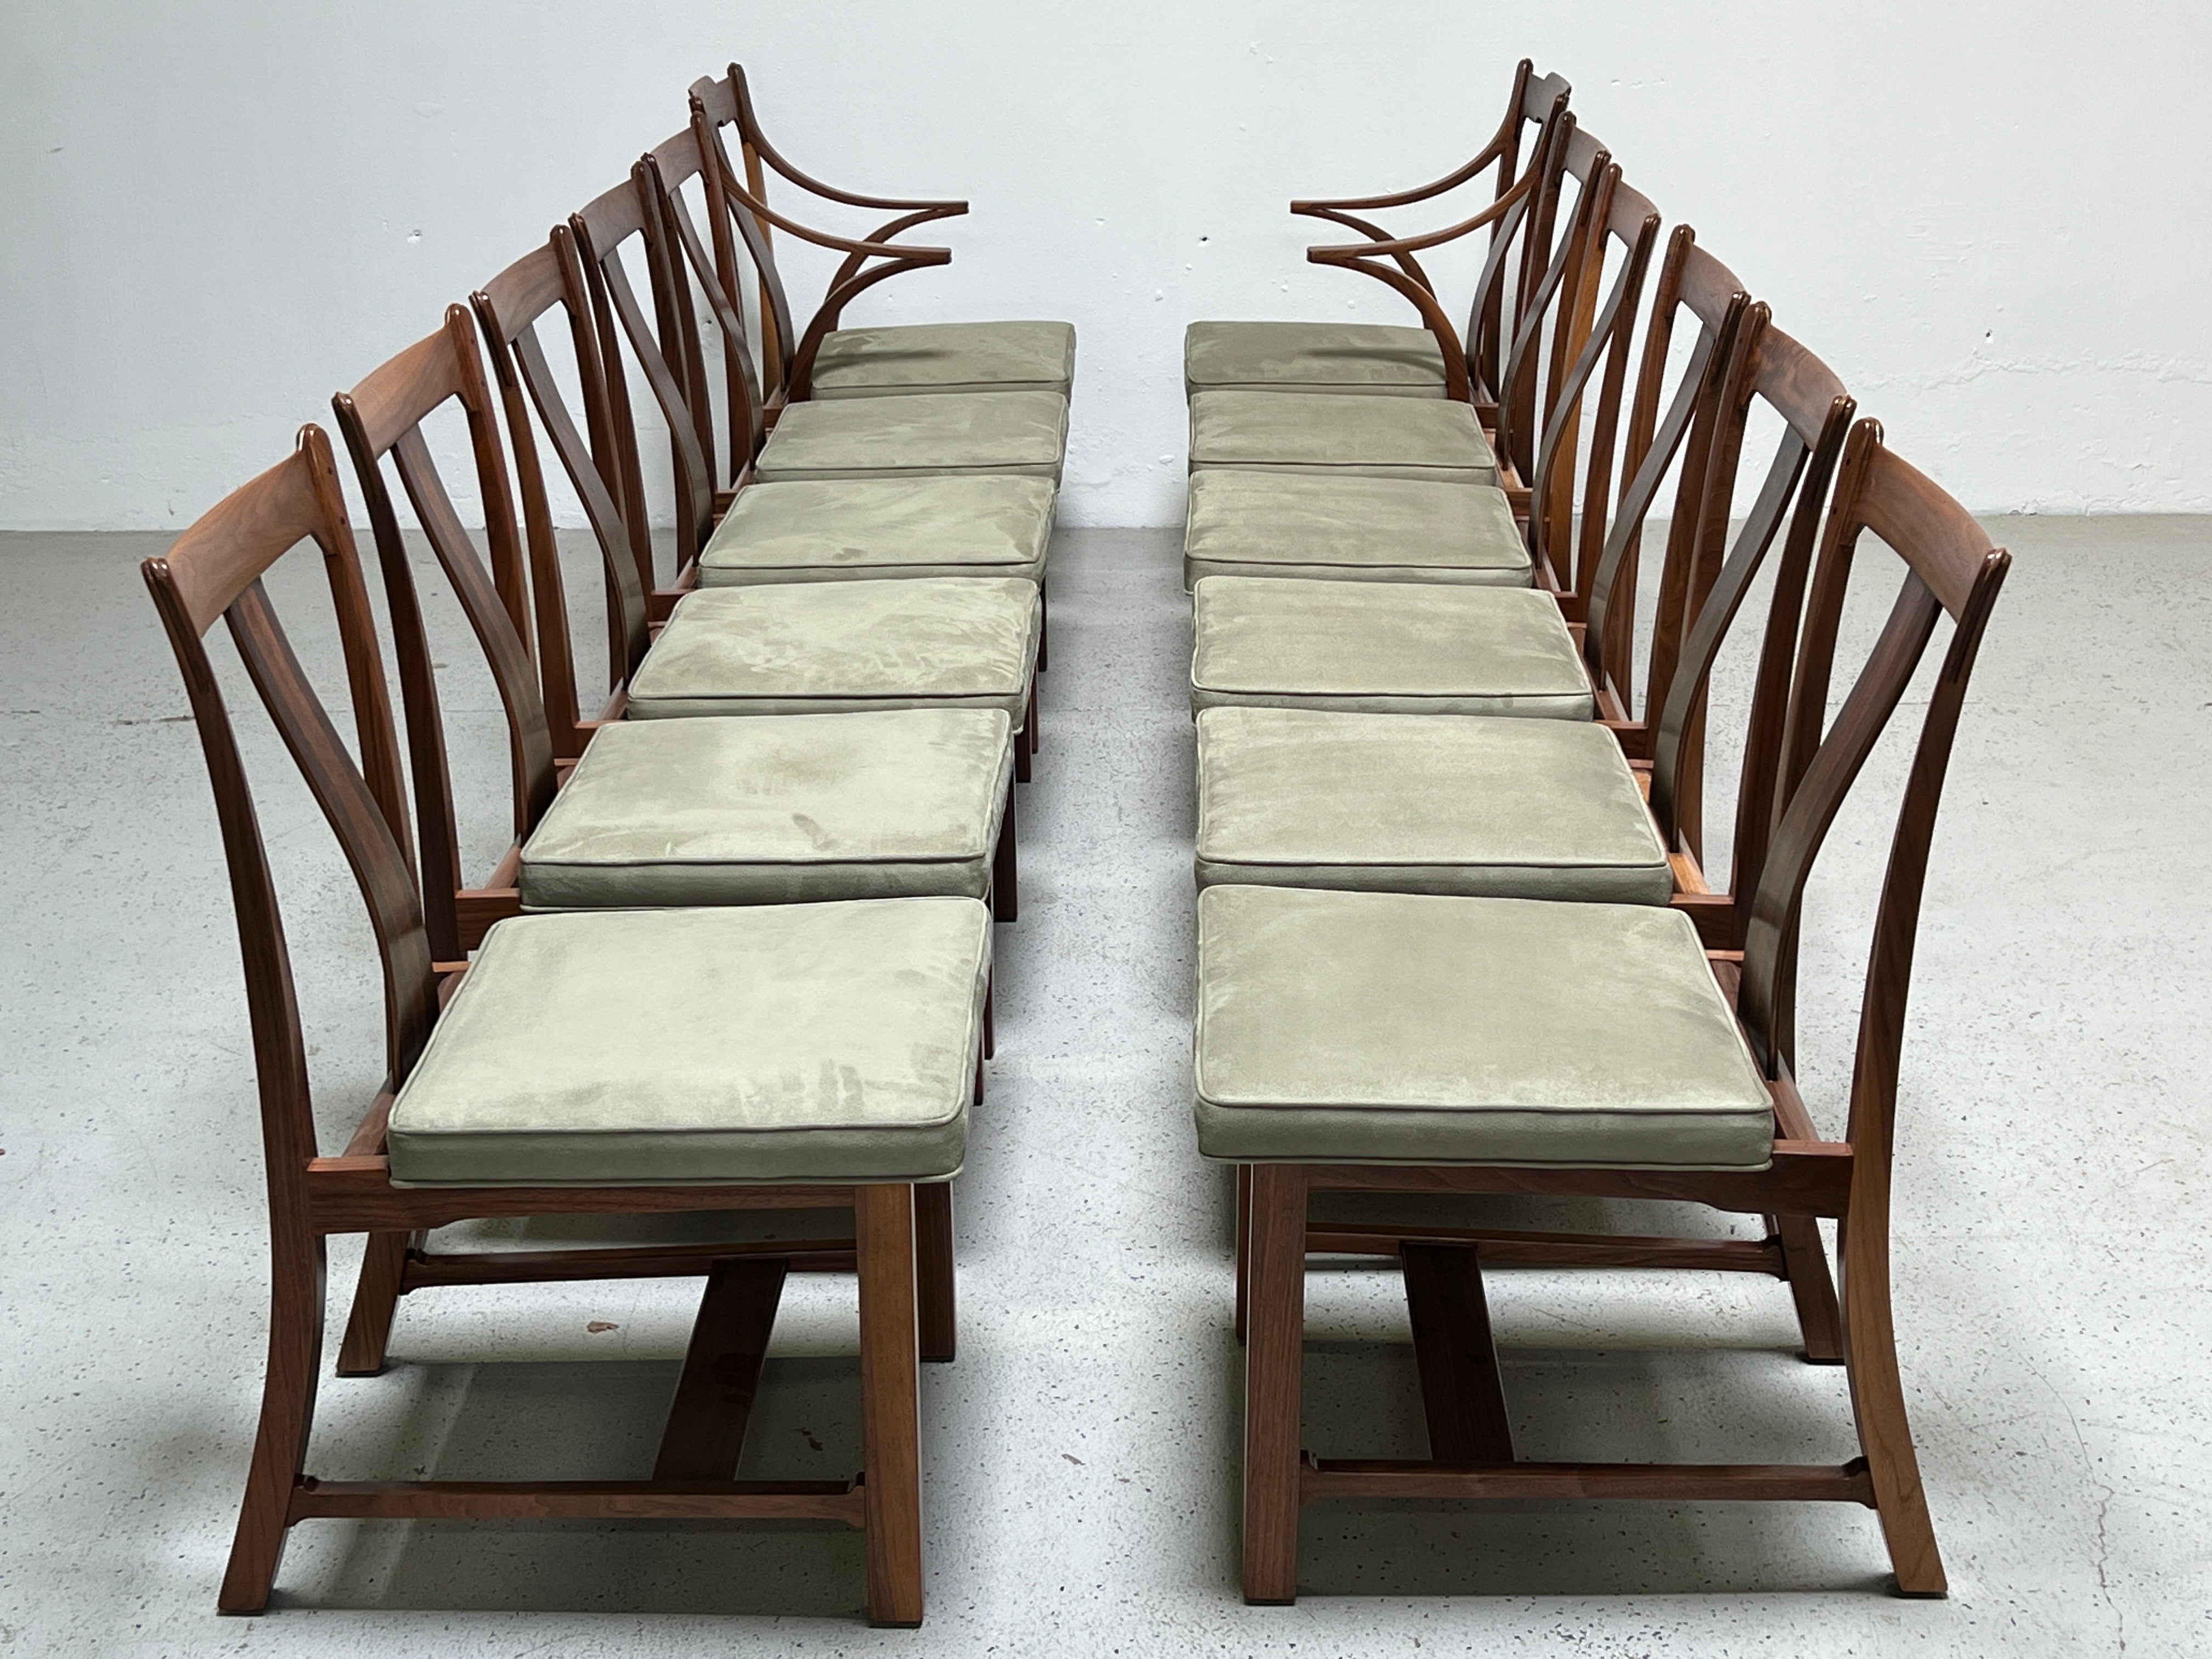 An extremely rare set of twelve dining chairs designed by Edward Wormley for Dunbar. Known as the Greene & Greene chair for it's crafted look with exposed tenon crest rail, rosewood bowed center splat and solid walnut construction. These chairs were